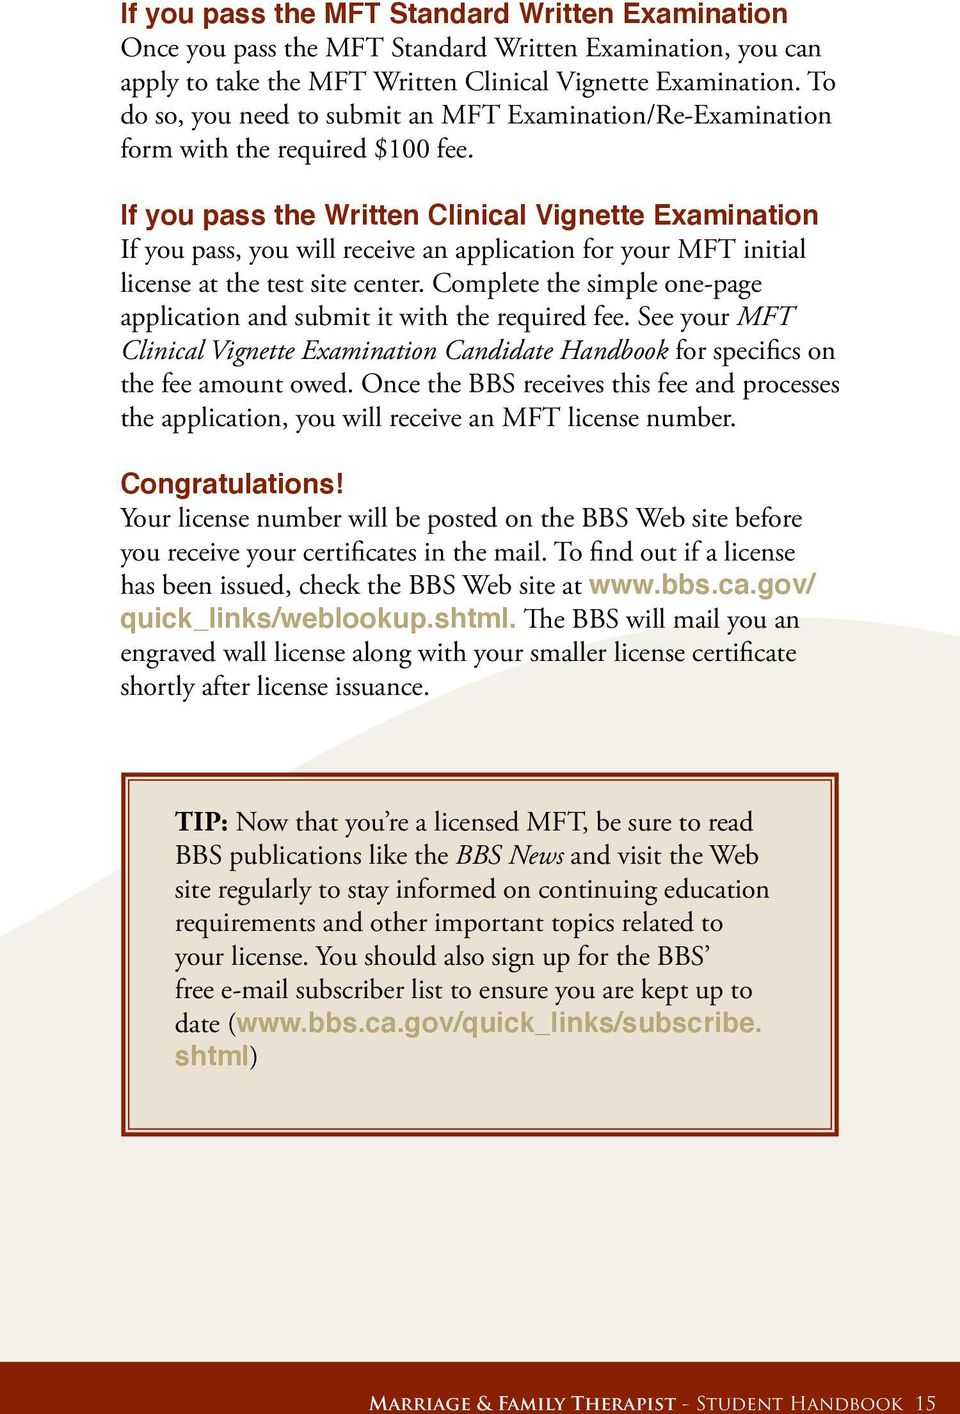 If you pass the Written Clinical Vignette Examination If you pass, you will receive an application for your MFT initial license at the test site center.